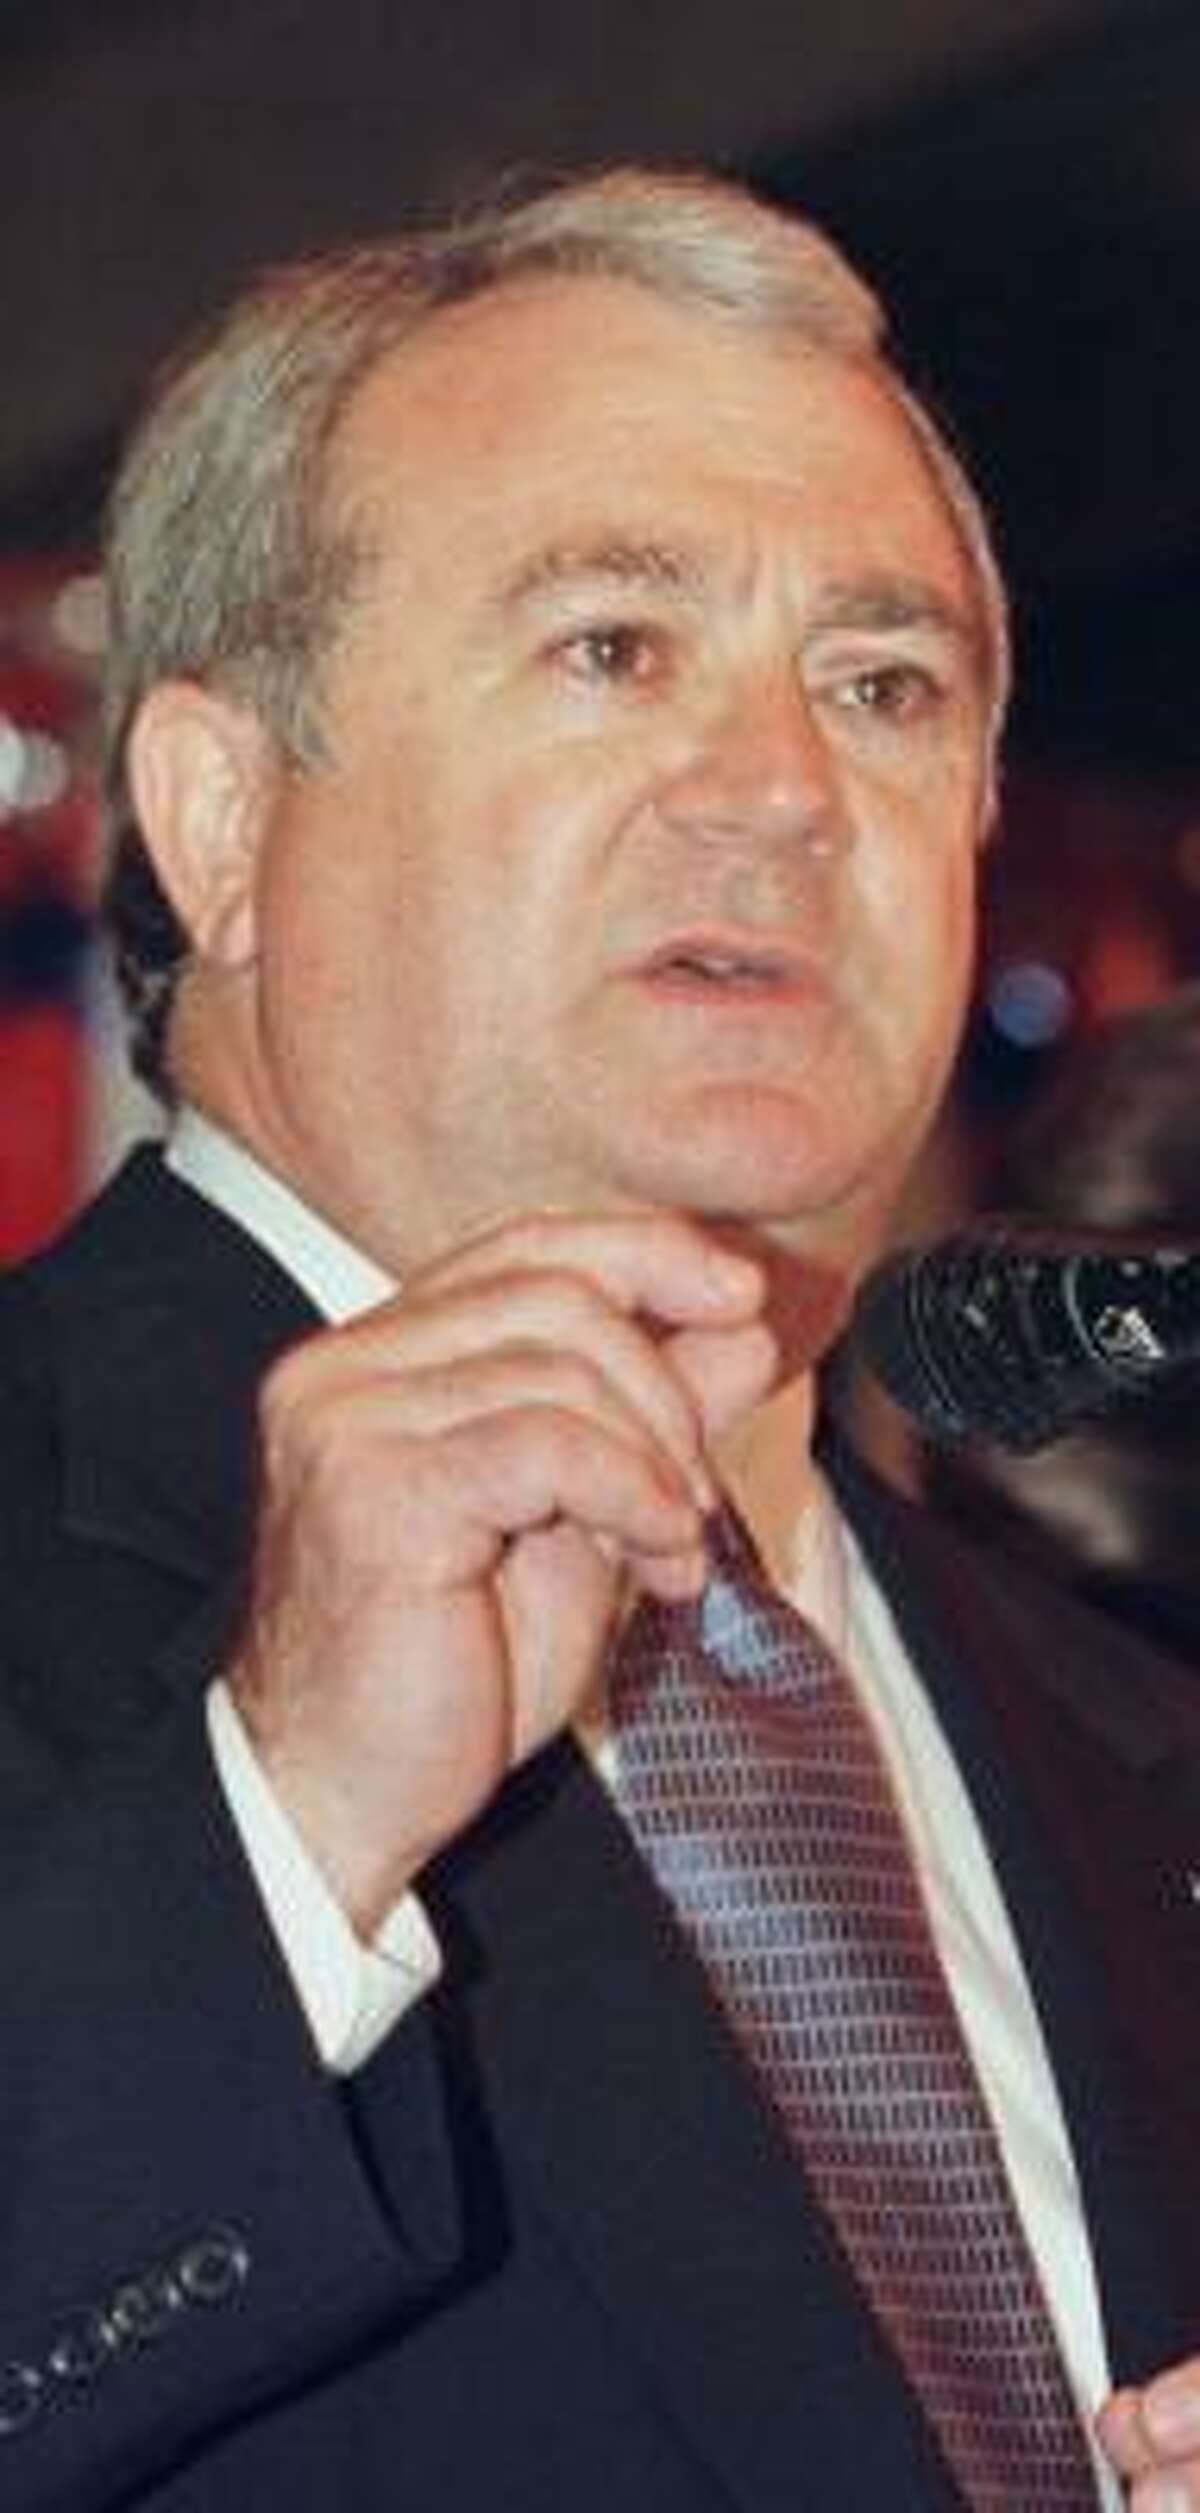 Jim Mattox served in Congress before winning two terms as Texas attorney general in the 1980s.